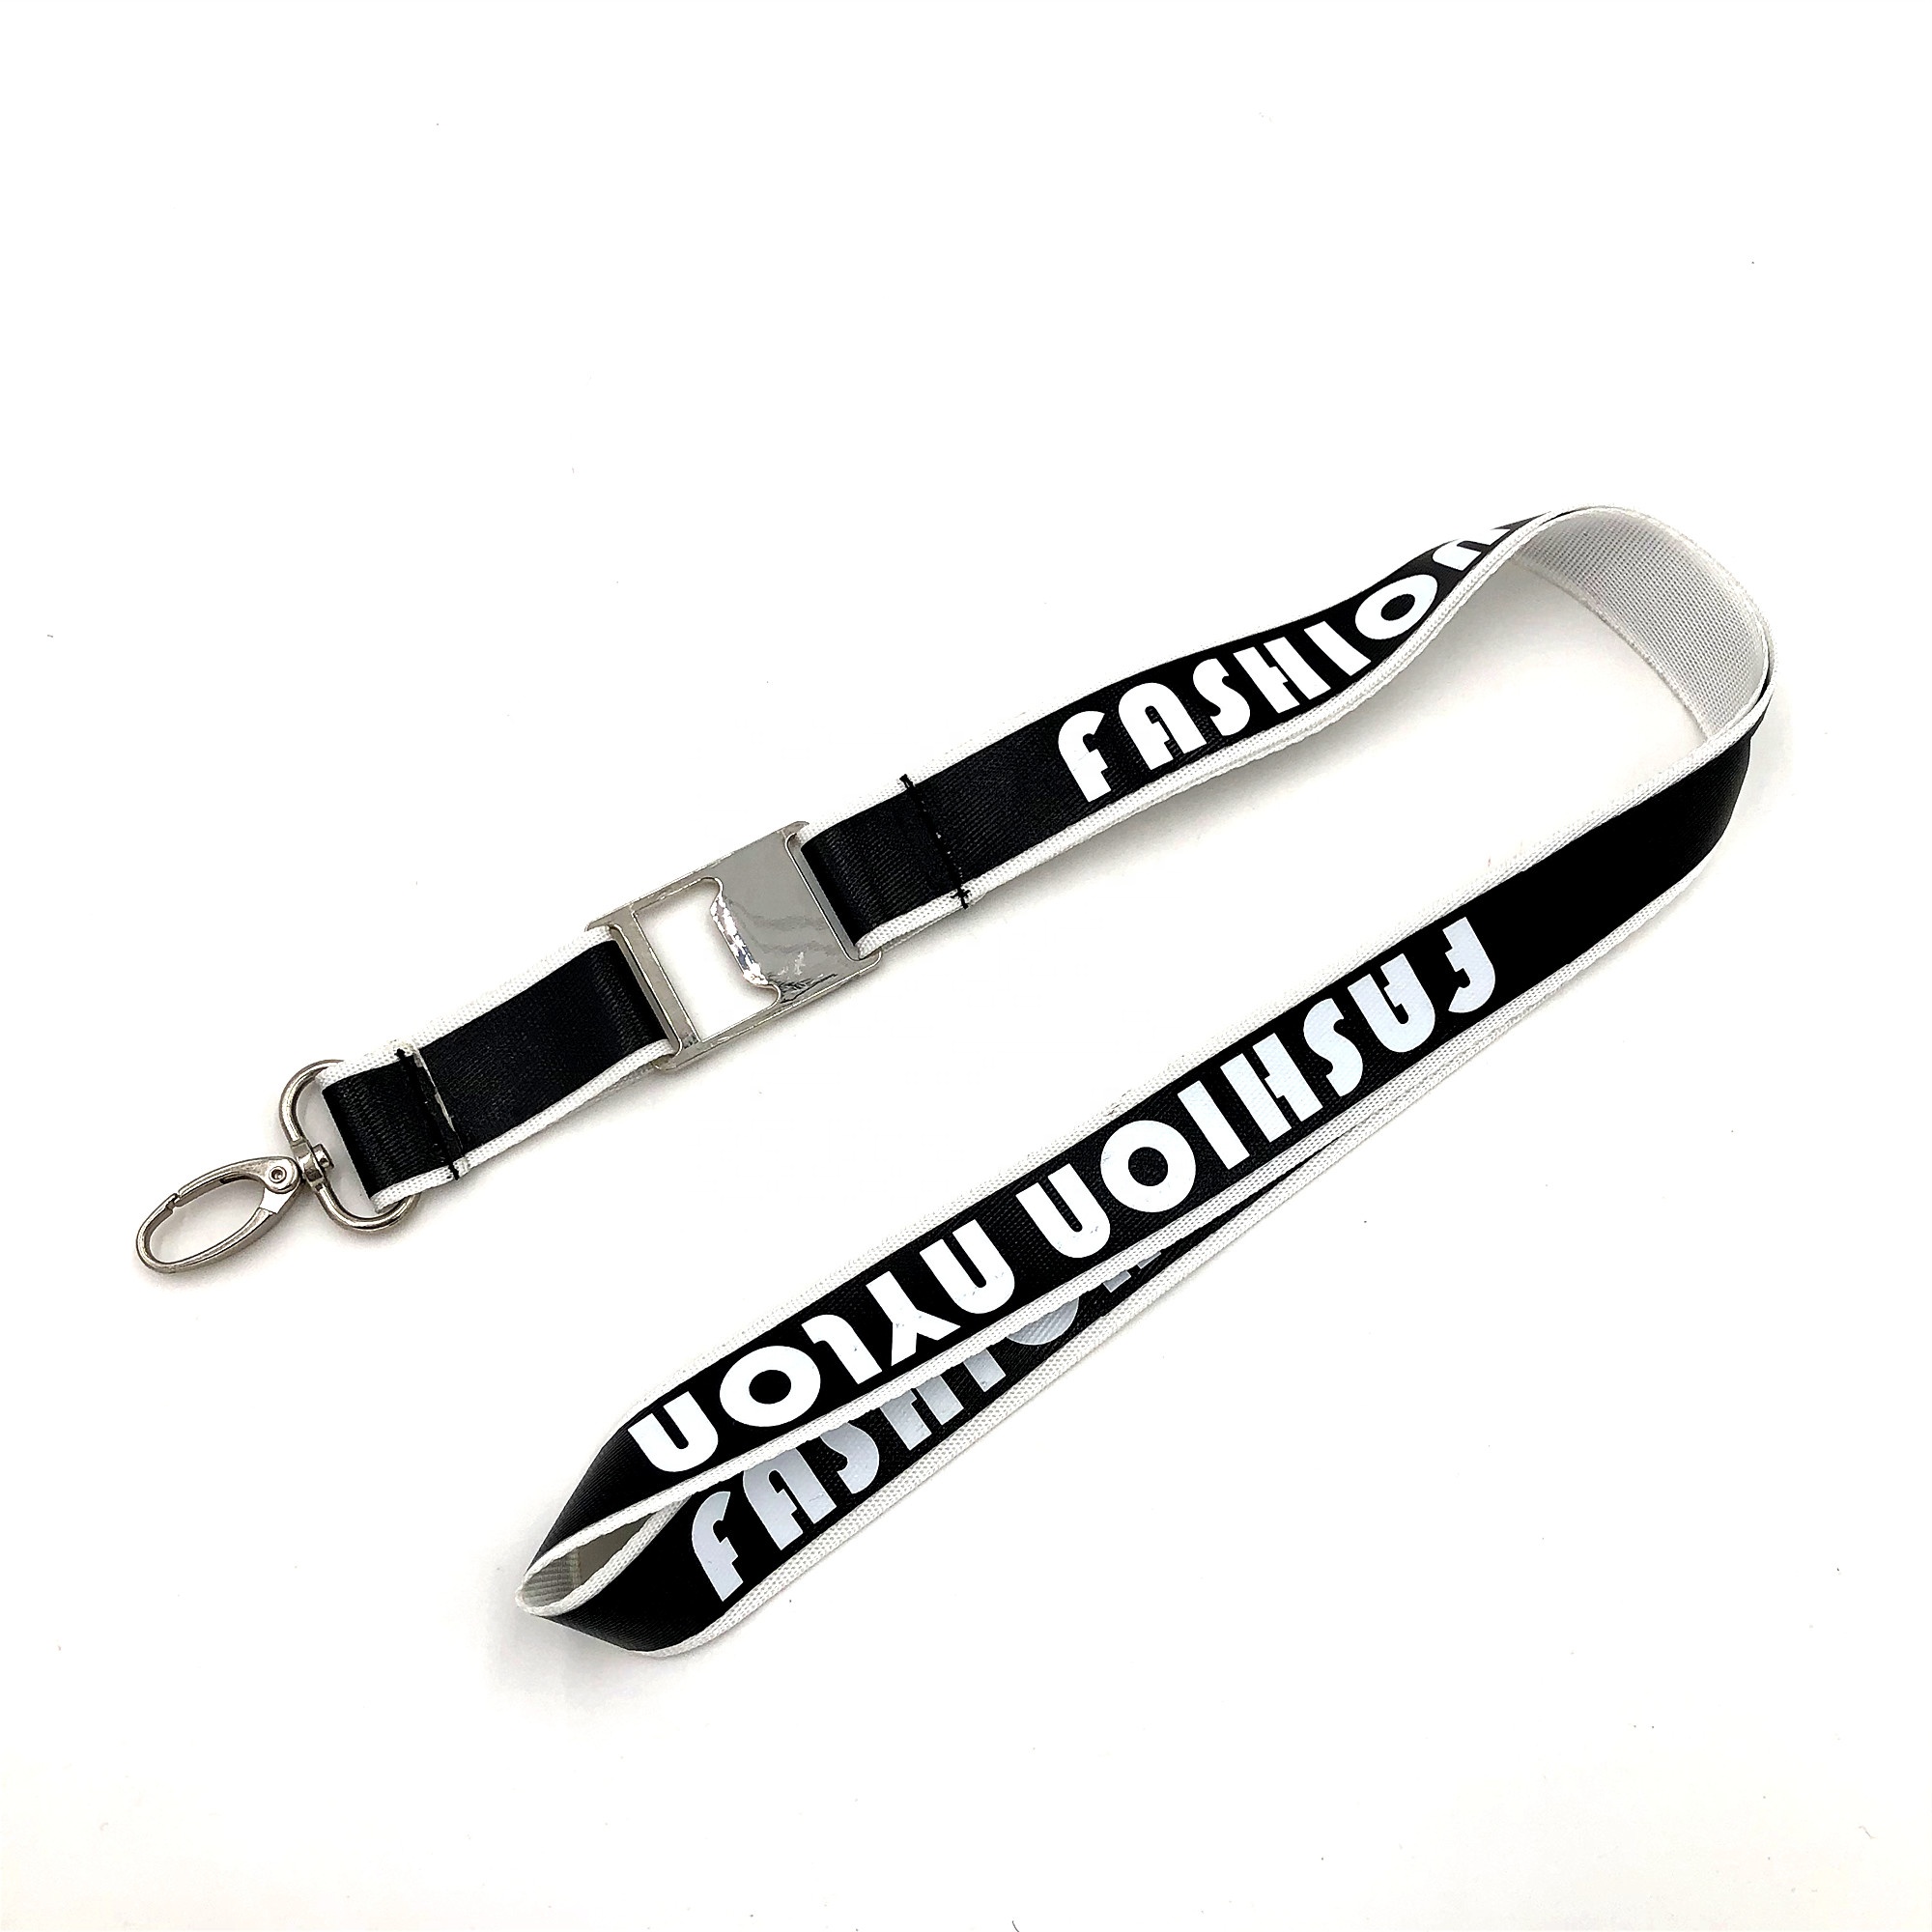 China Cheap price Sublimation Printing Lanyard – Factory wholesale low price high quality custom made bottle opener lanyard – Bison